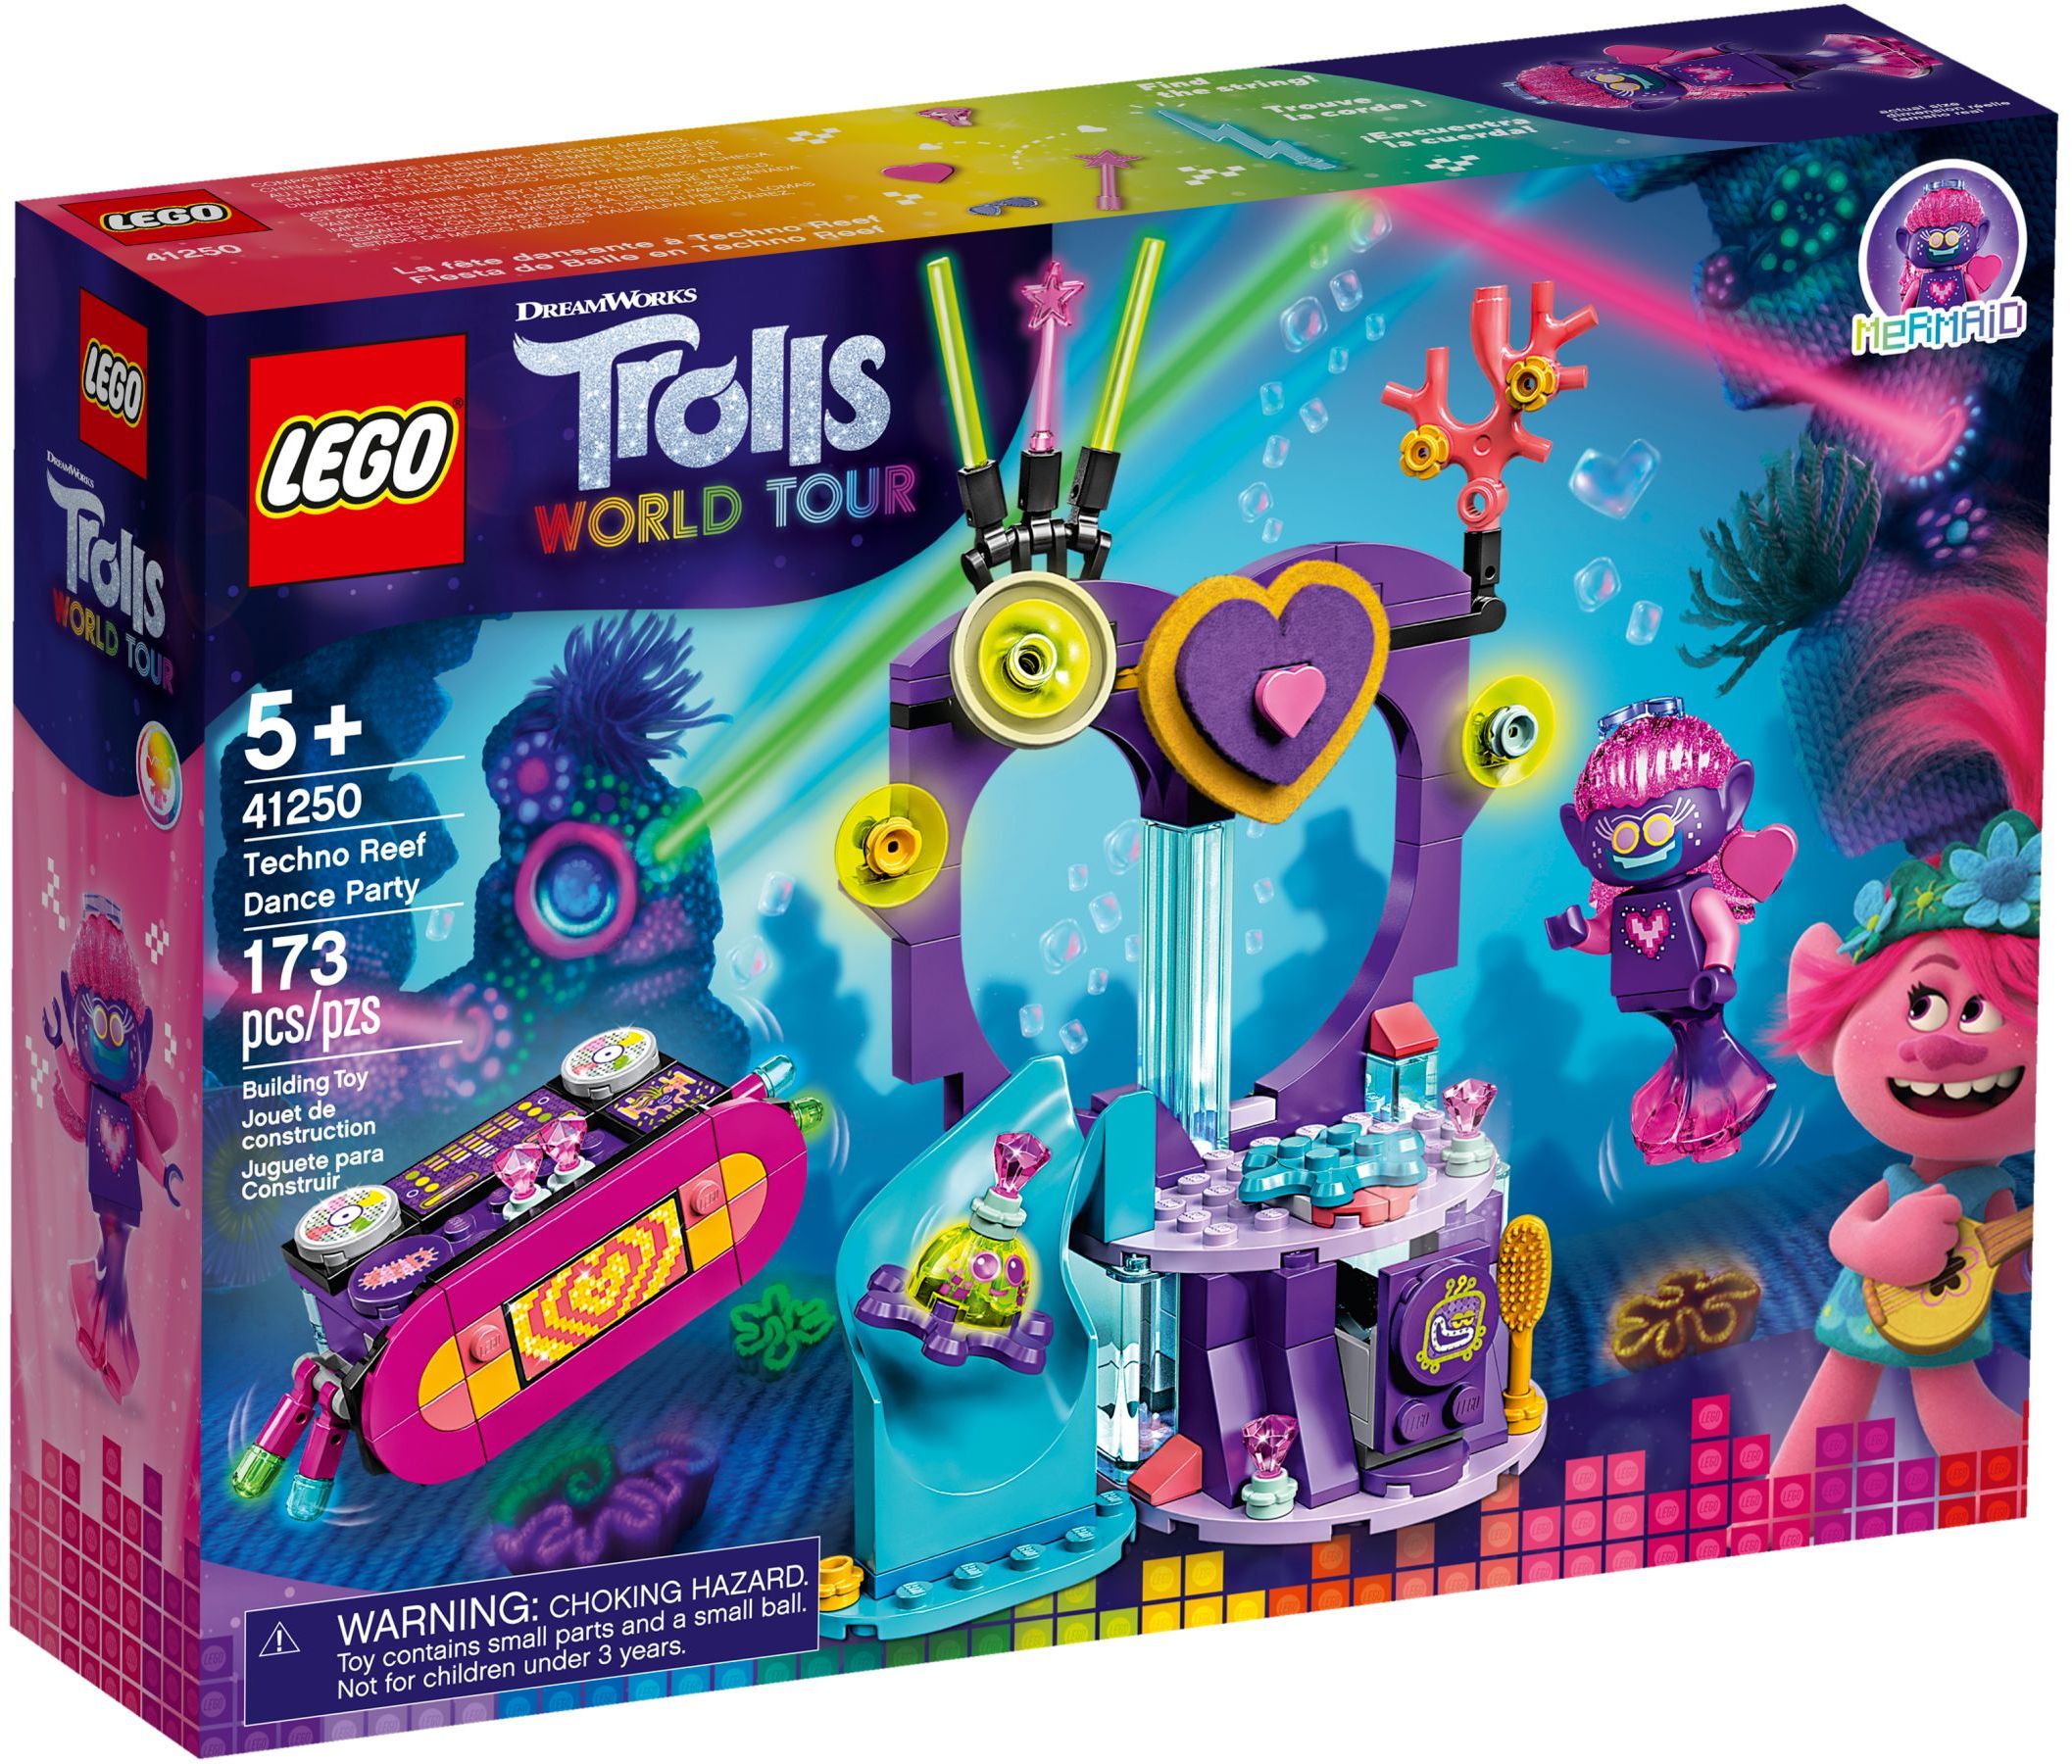 Great Trolls Gift for Creative Kids New 2020 LEGO Trolls World Tour Lonesome Flats Raft Adventure 41253 Kids Building Kit 159 Pieces 